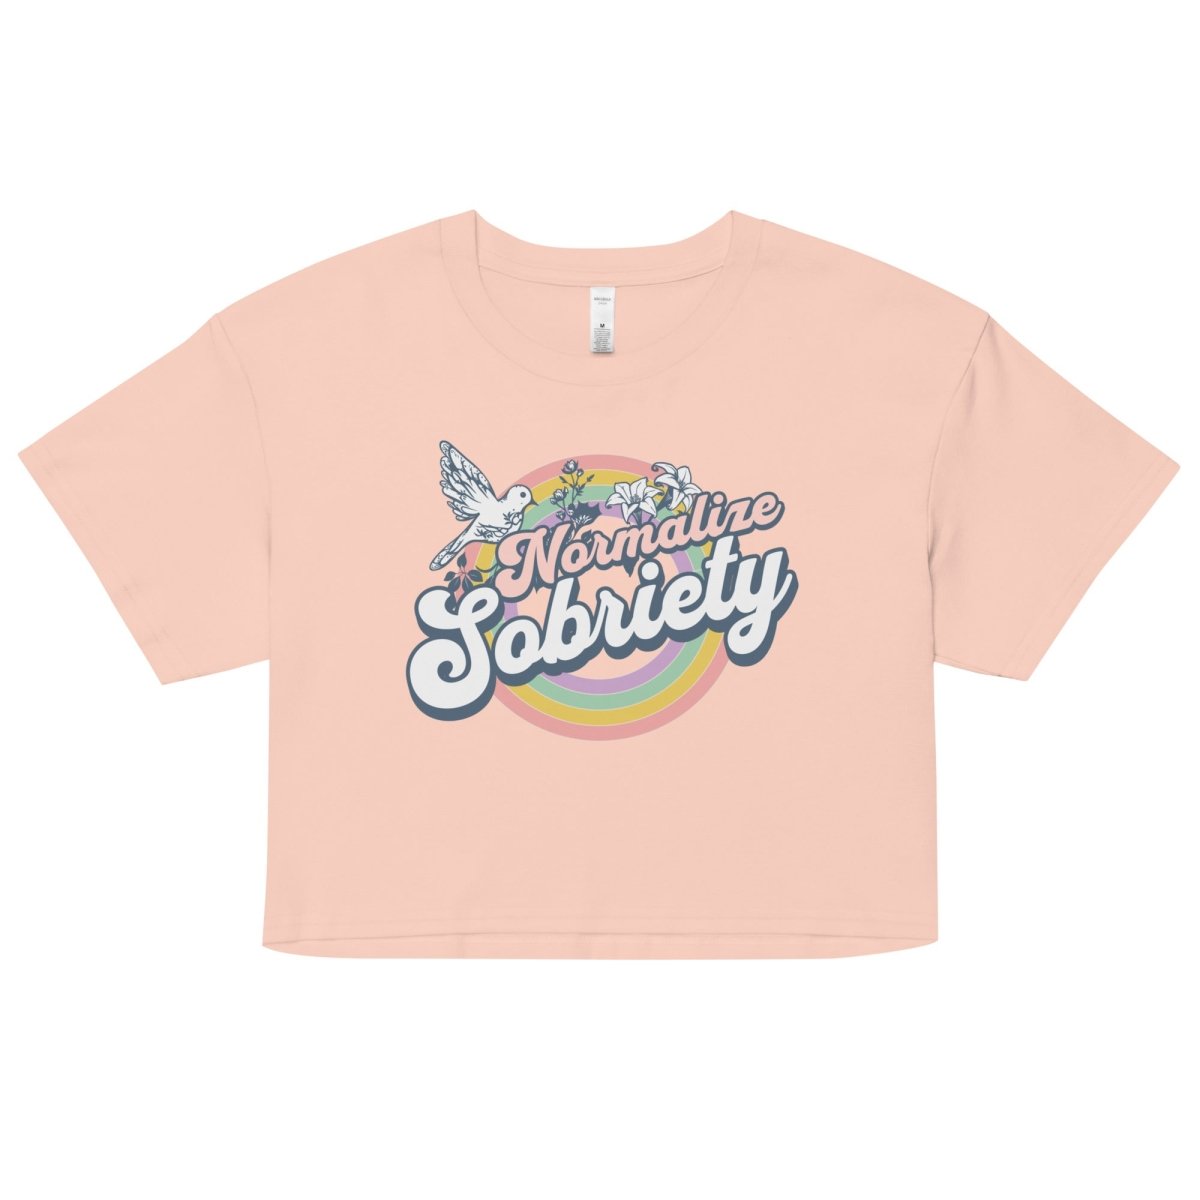 "Normalize Sobriety" Women's Comfort Crop Top - Pale Pink / S | Sobervation